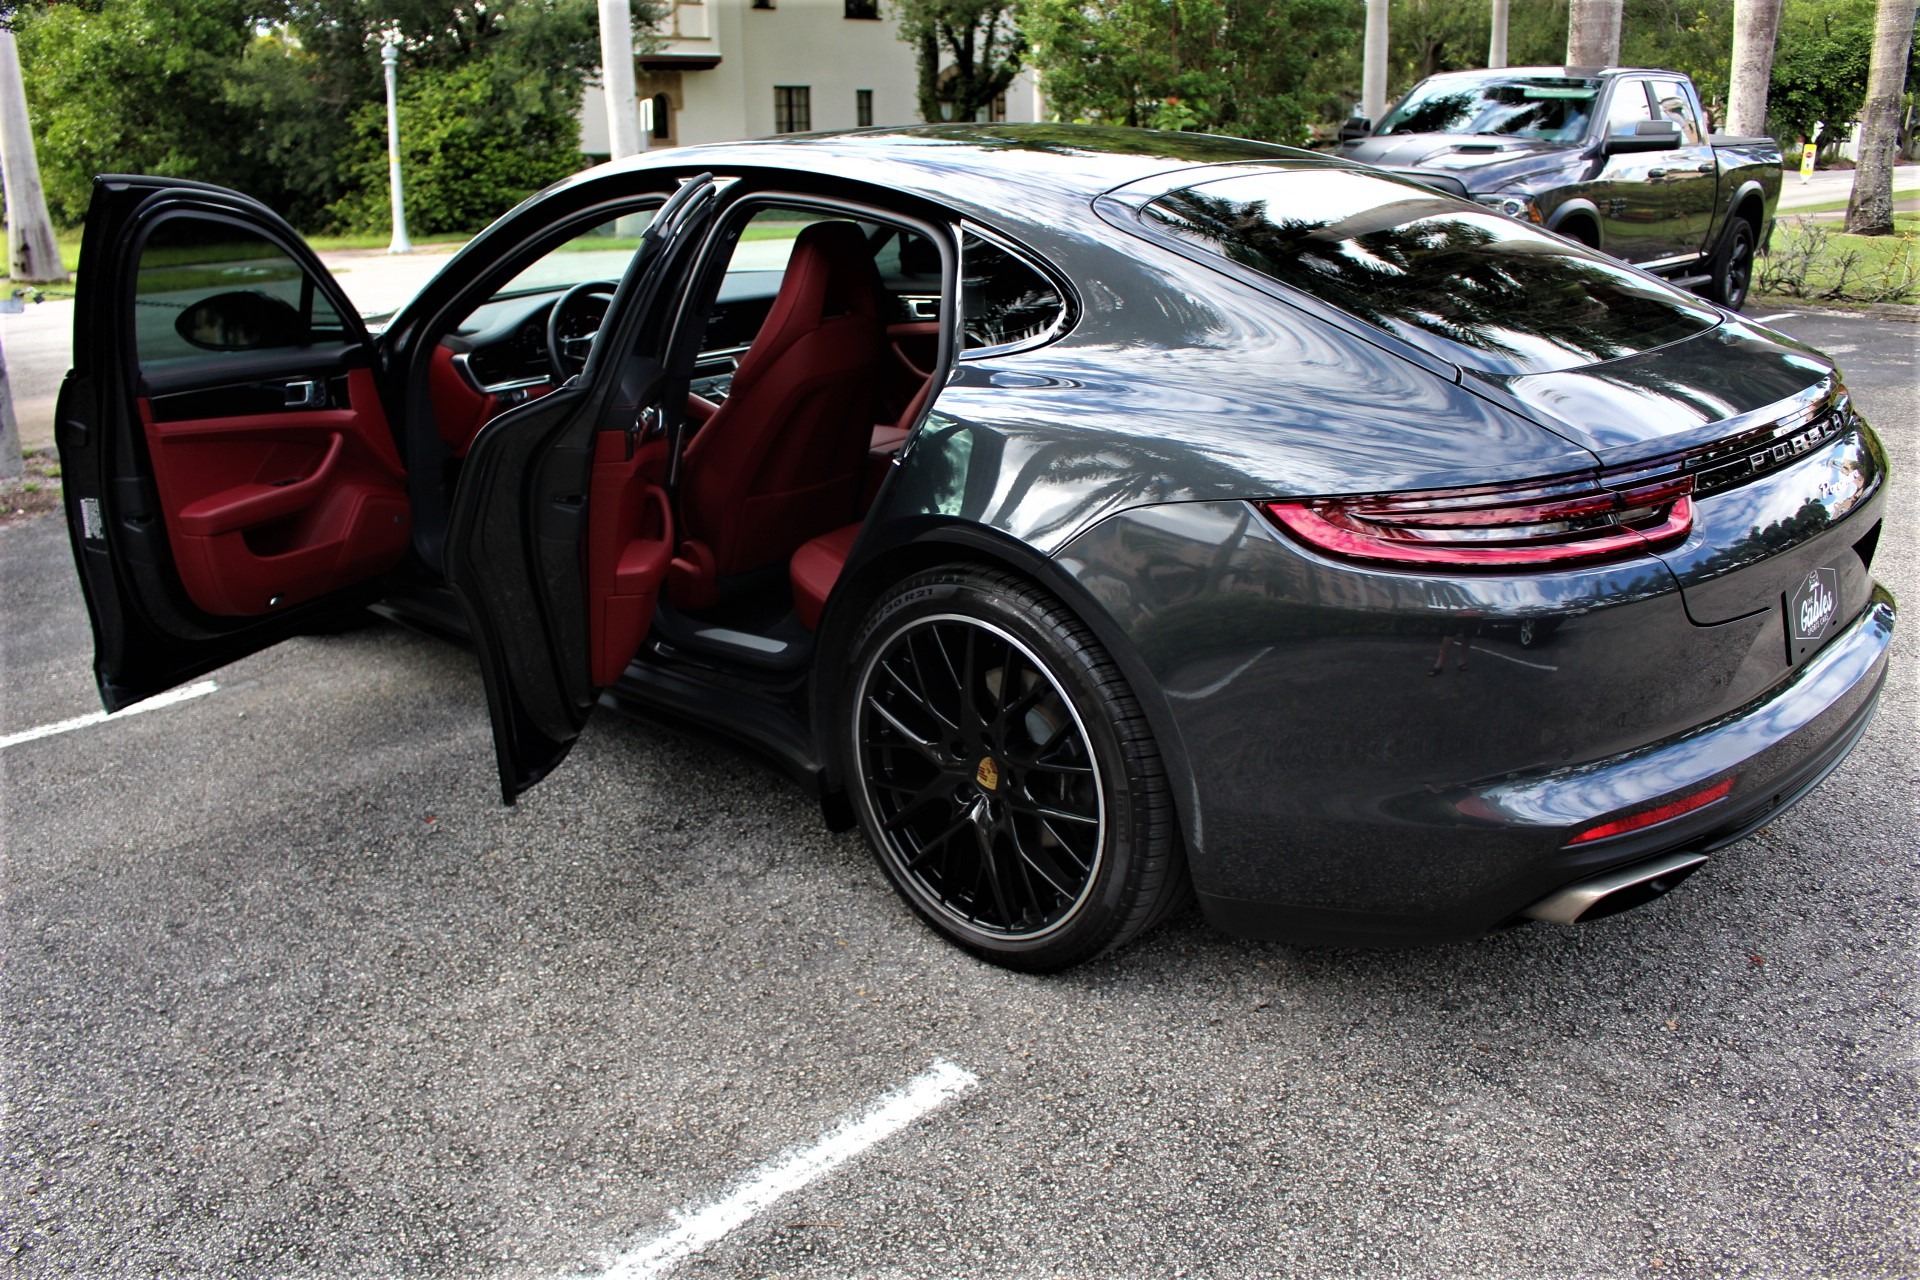 Used 2019 Porsche Panamera for sale Sold at The Gables Sports Cars in Miami FL 33146 1